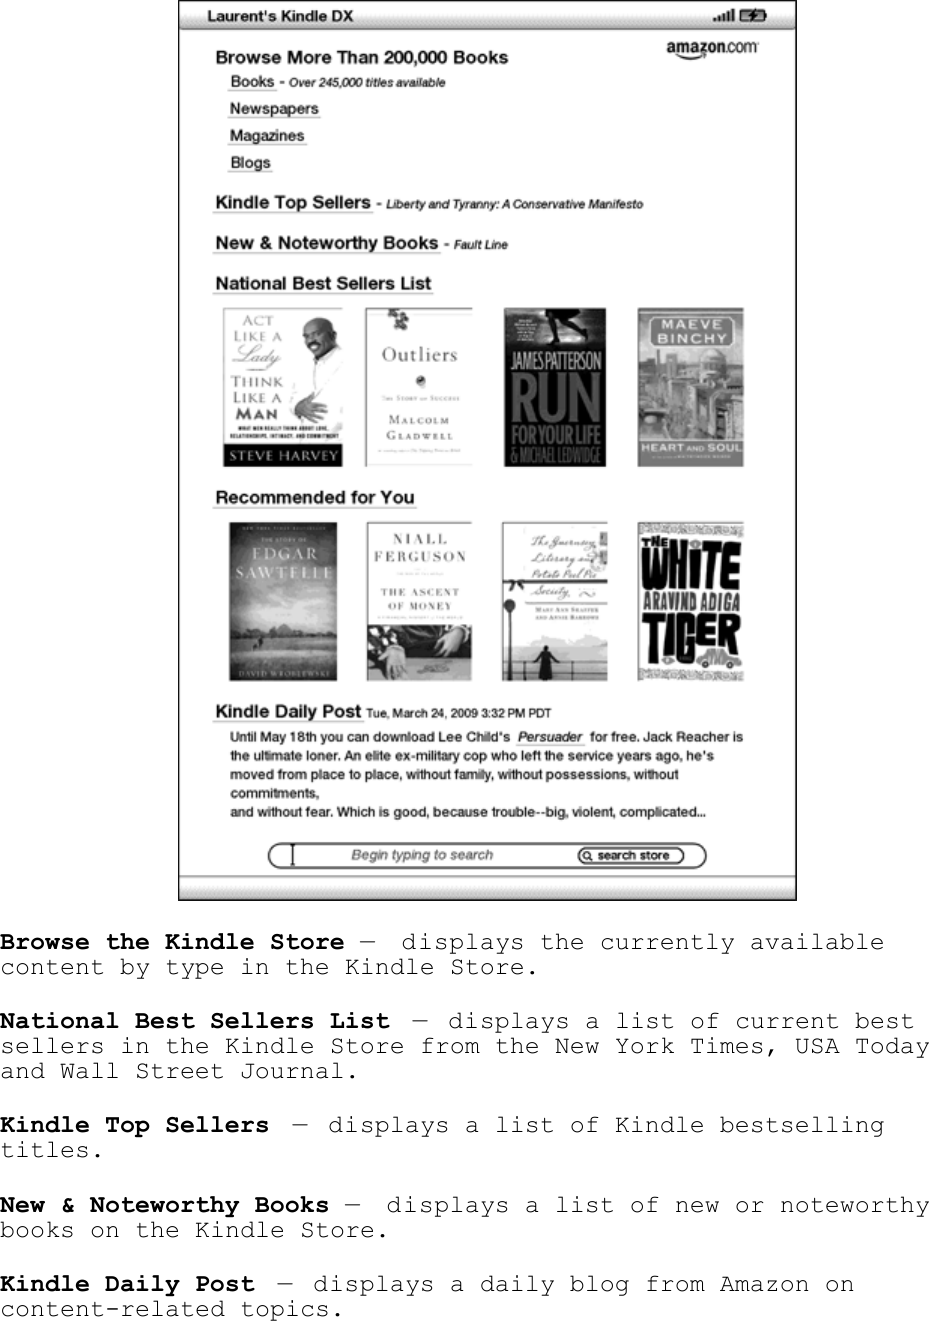    Browse the Kindle Store —  displays the currently available content by type in the Kindle Store. National Best Sellers List — displays a list of current best sellers in the Kindle Store from the New York Times, USA Today and Wall Street Journal. Kindle Top Sellers — displays a list of Kindle bestselling titles. New &amp; Noteworthy Books —  displays a list of new or noteworthy books on the Kindle Store. Kindle Daily Post — displays a daily blog from Amazon on content-related topics. 